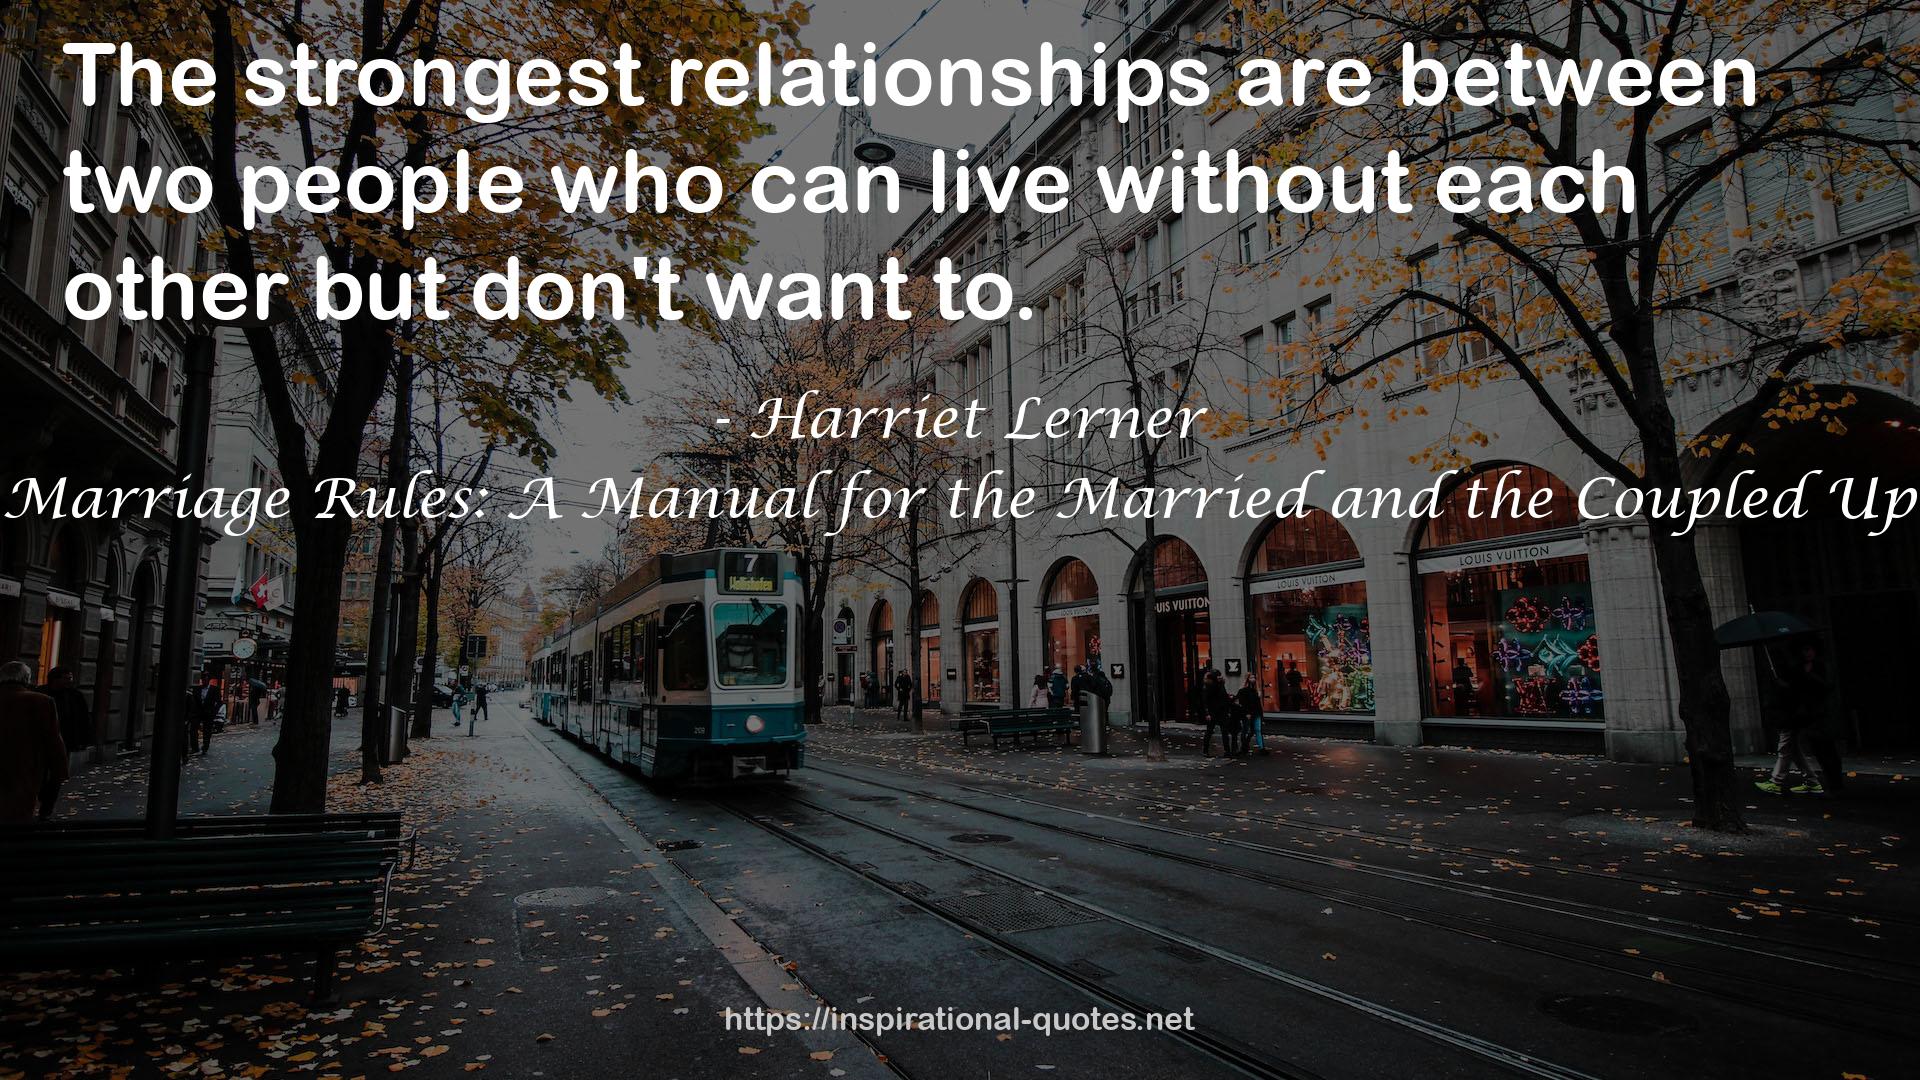 Marriage Rules: A Manual for the Married and the Coupled Up QUOTES